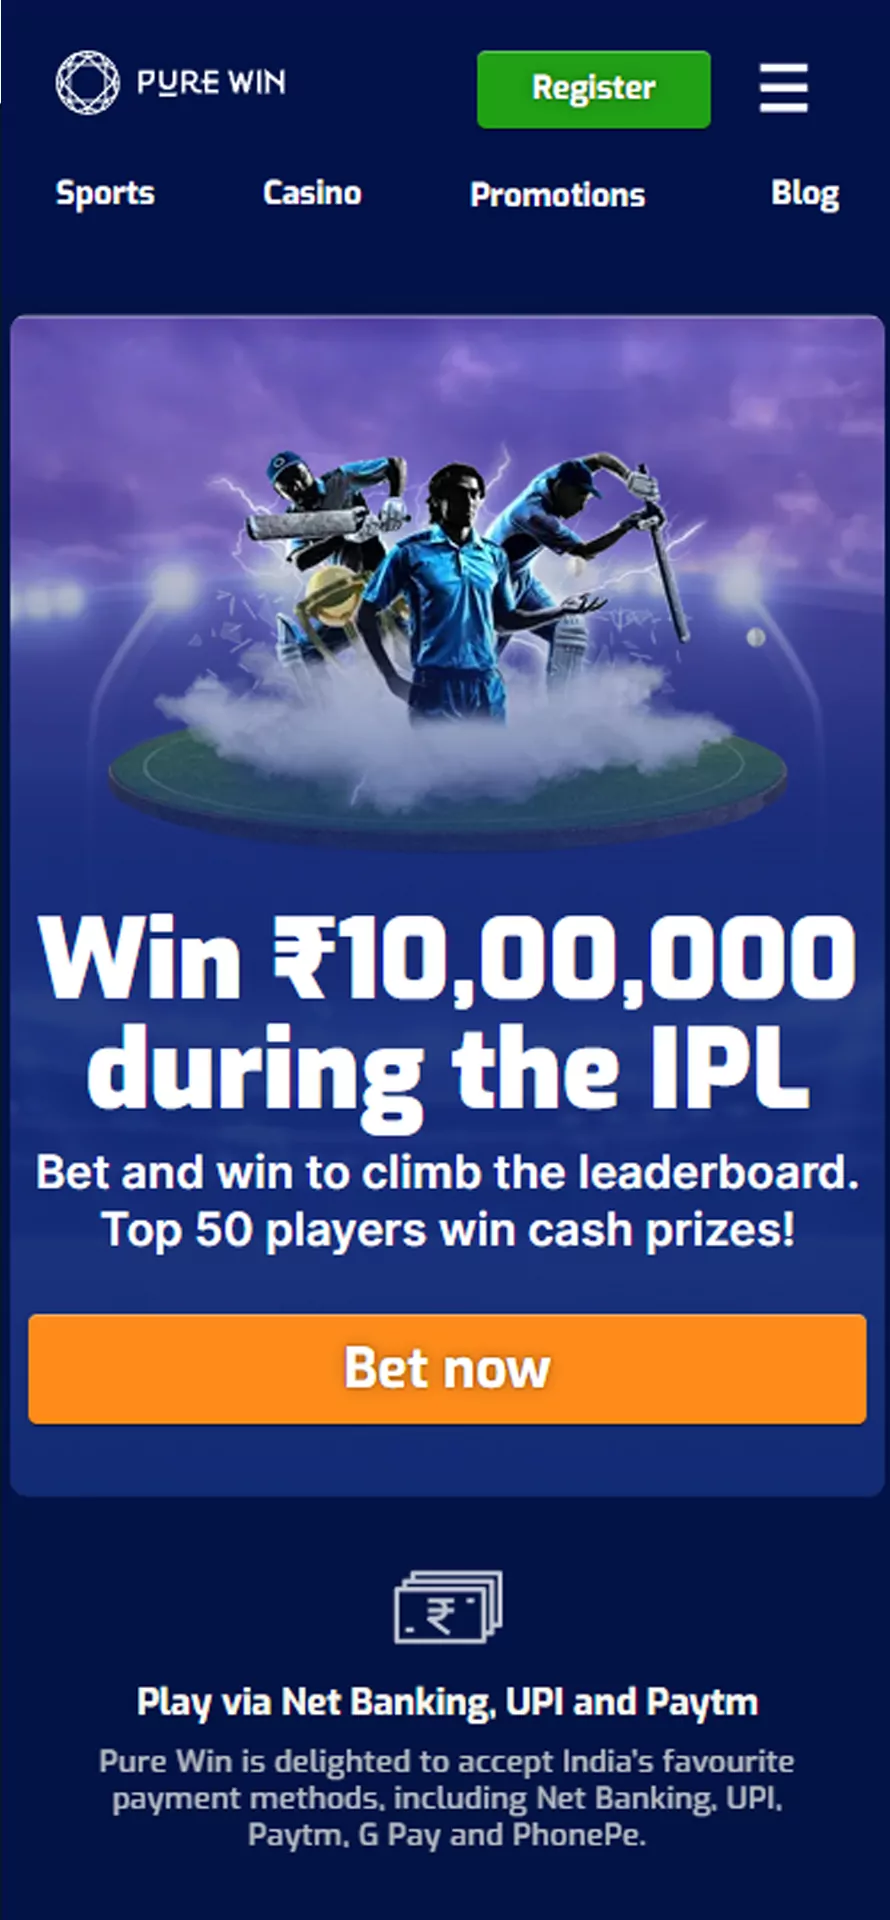 Start betting at Pure Win App during IPL.